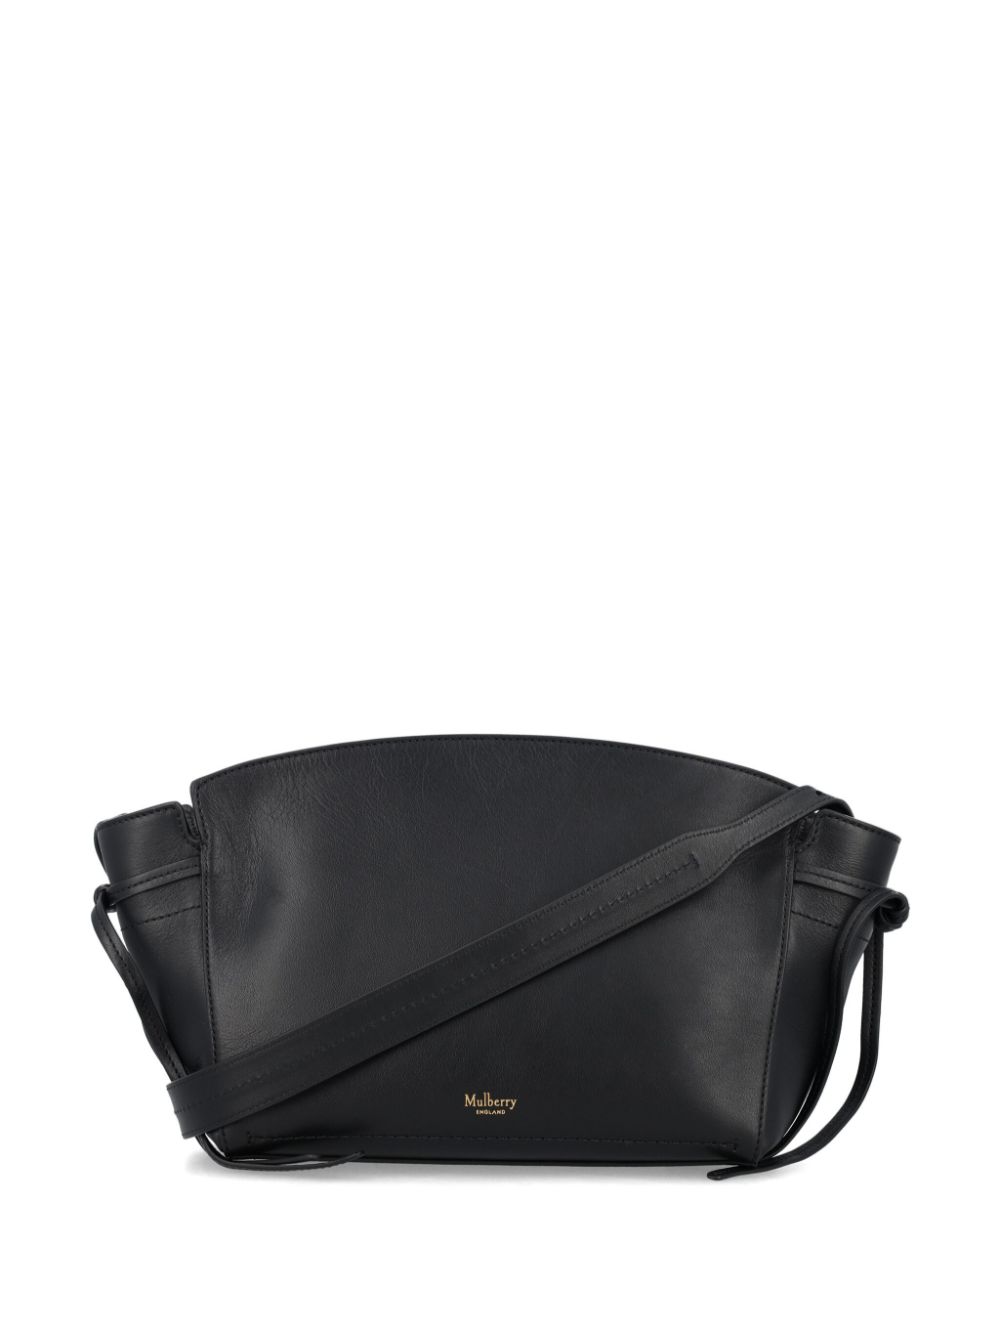 Mulberry Clovelly leather crossbody bag - Black von Mulberry